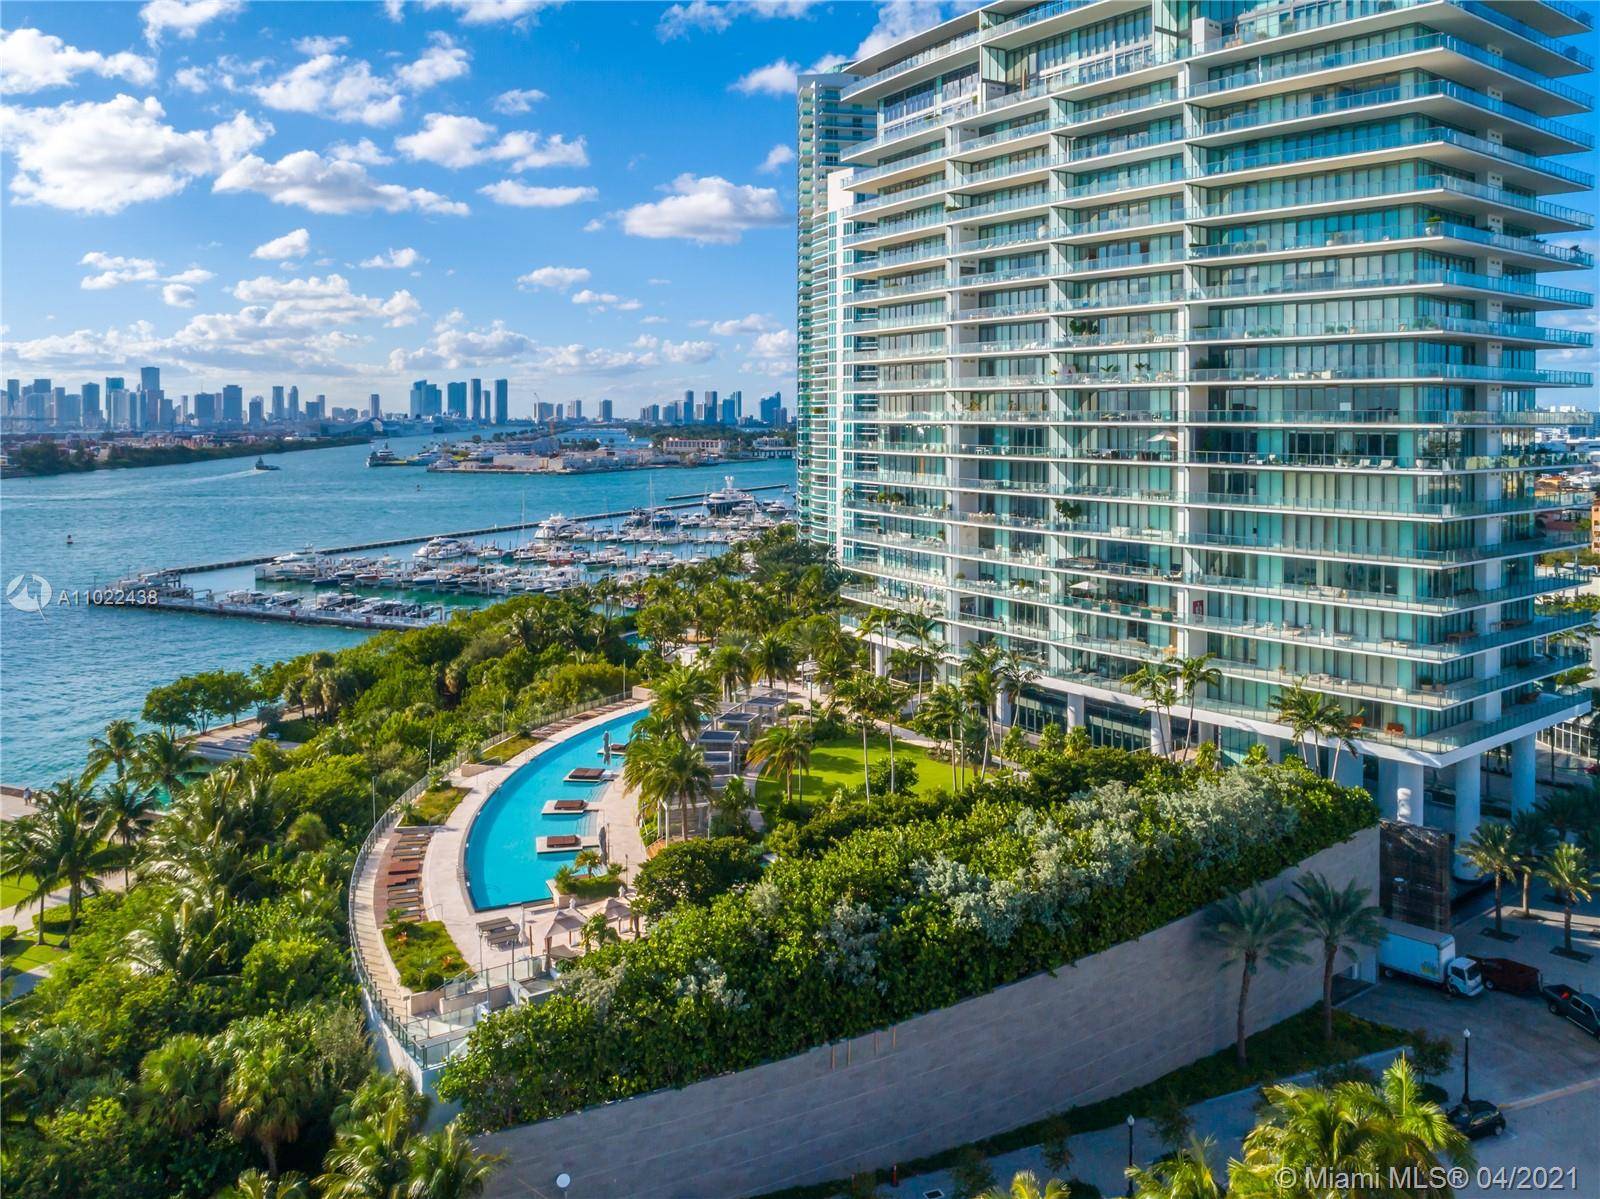 As a private boutique building with only 67 residences and all the amenities one would expect of an exclusive address in South Beach, this condo offers its residents a private ...